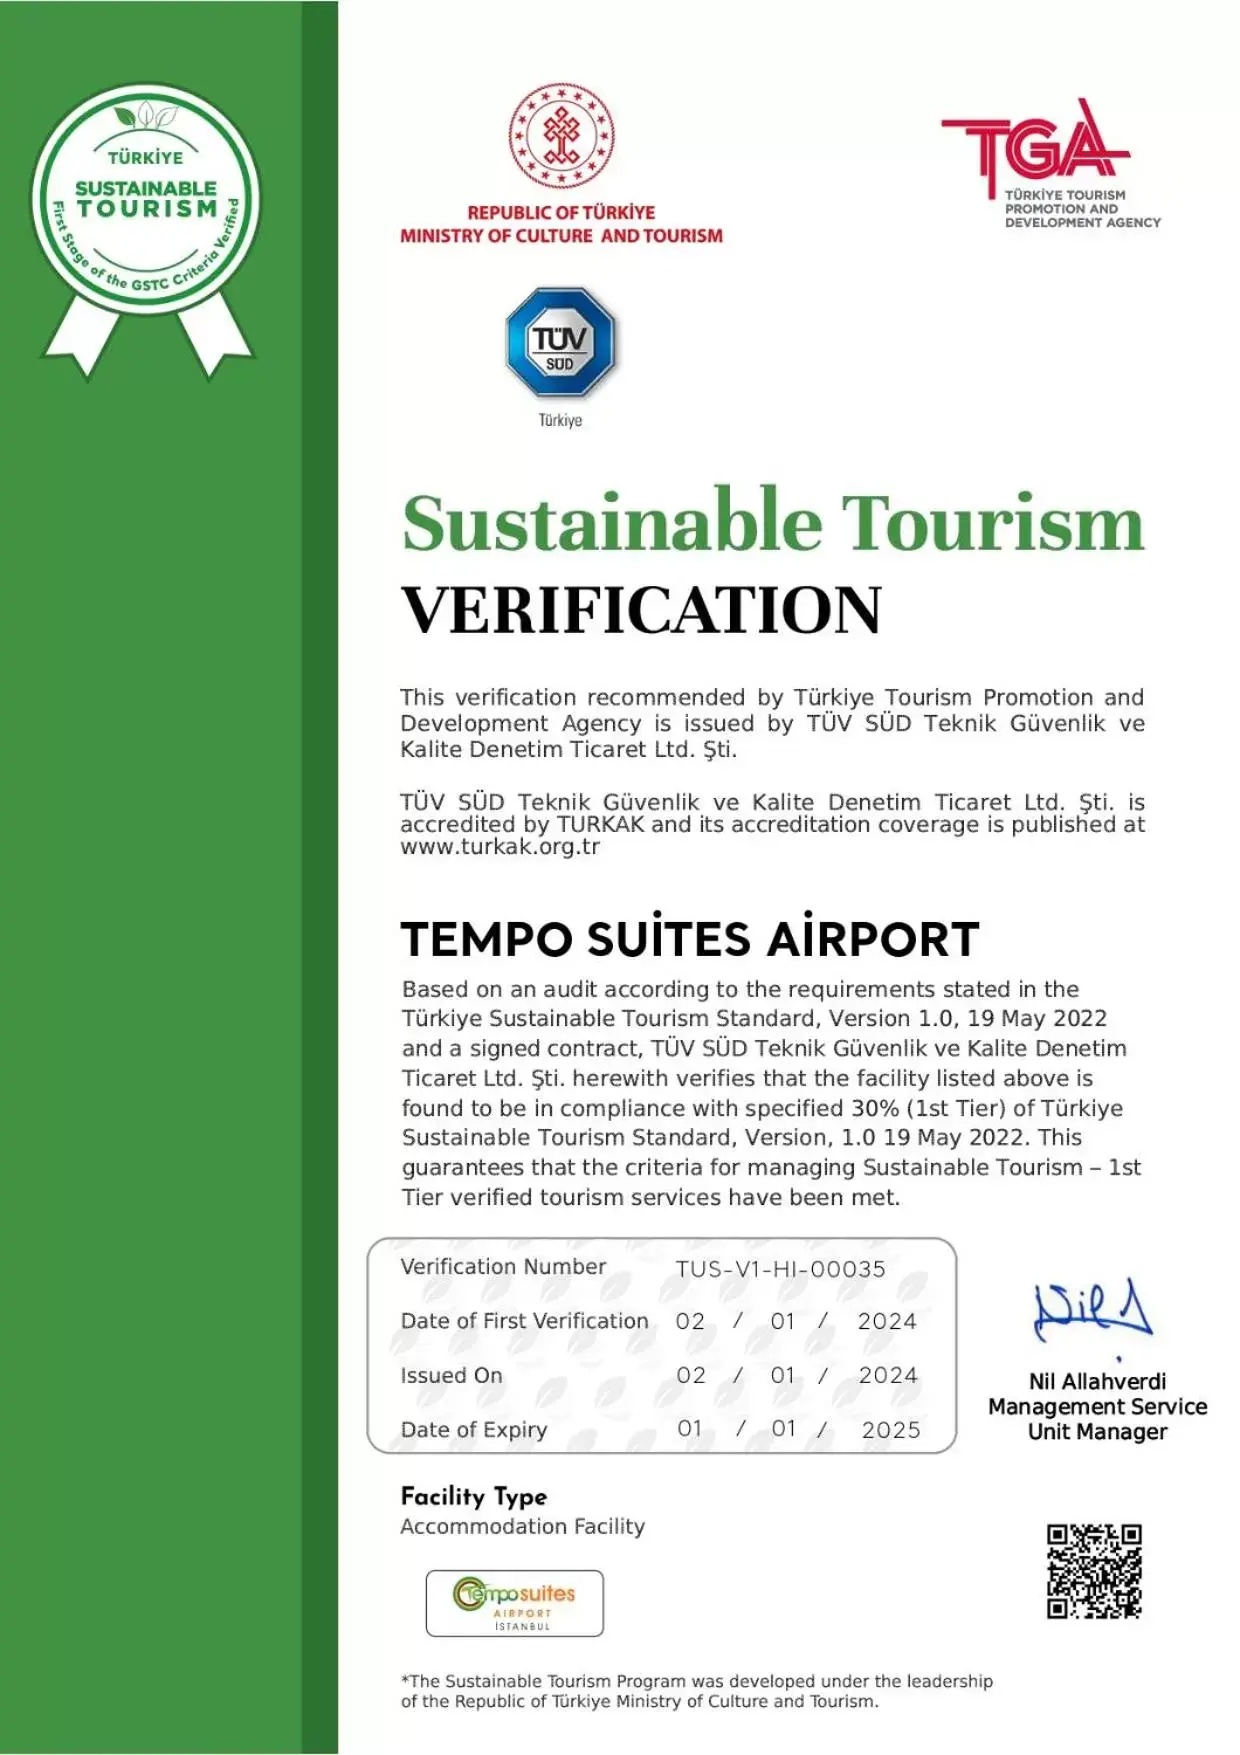 Certificate/Award in Tempo Suites Airport